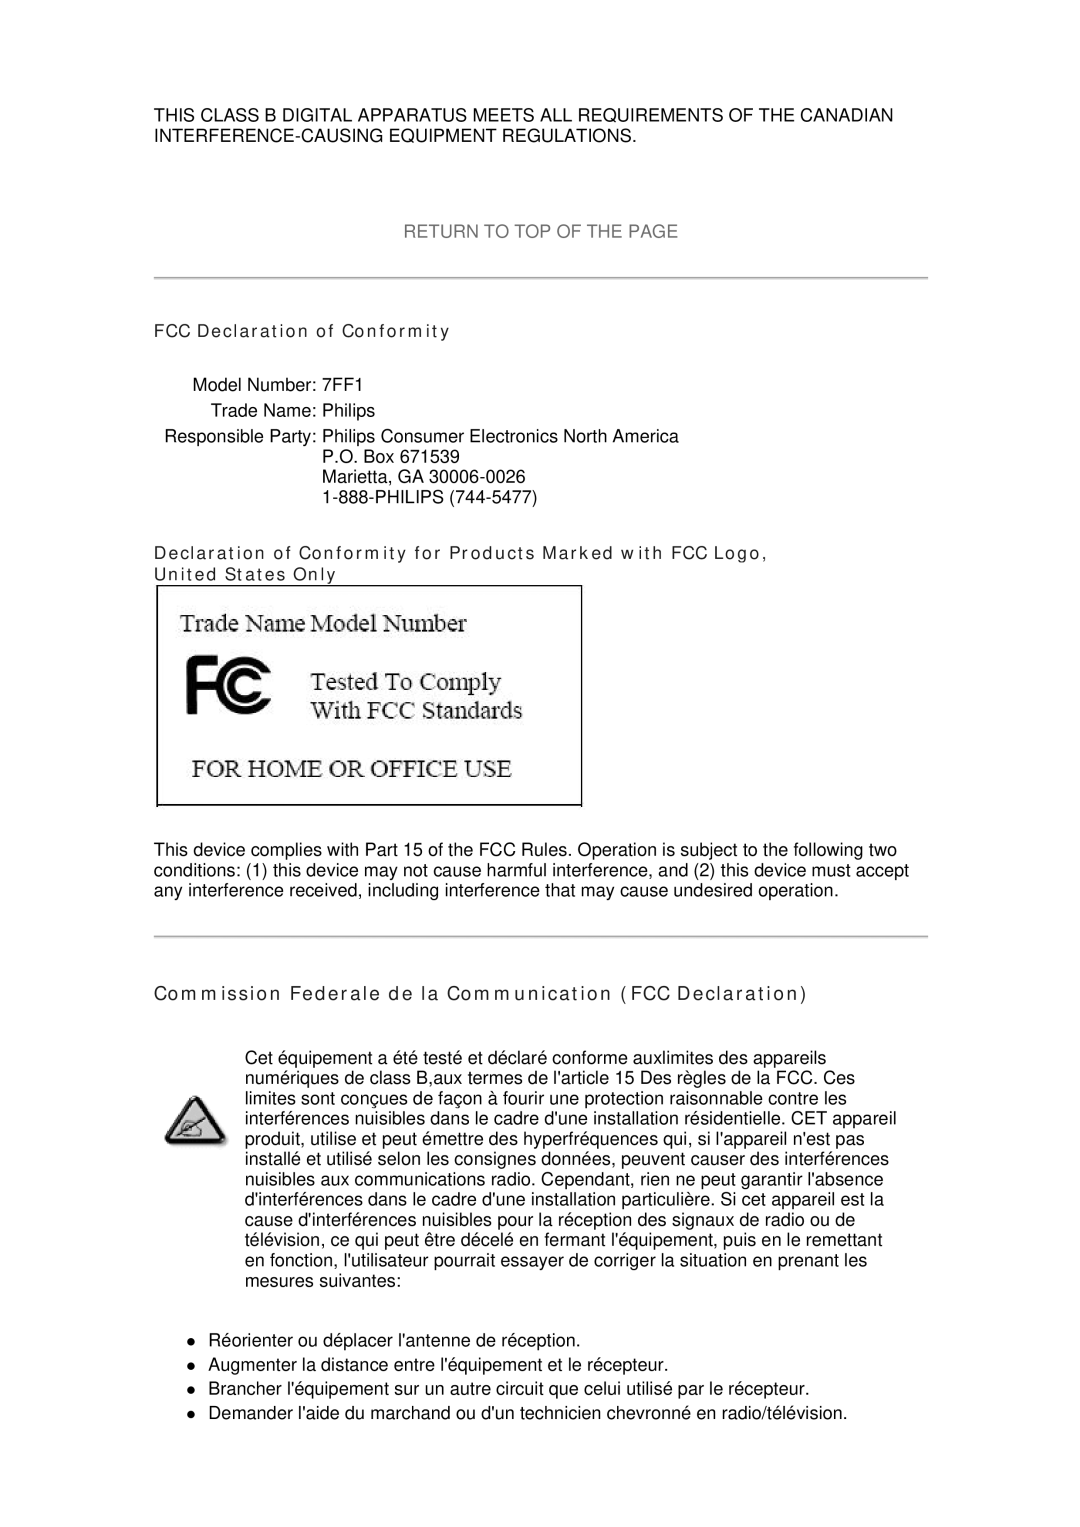 Philips 7FF1M4, 7FF1CMI, 7FF1CWO, 7FF1CME user manual Return To Top Of The Page, FCC Declaration of Conformity 